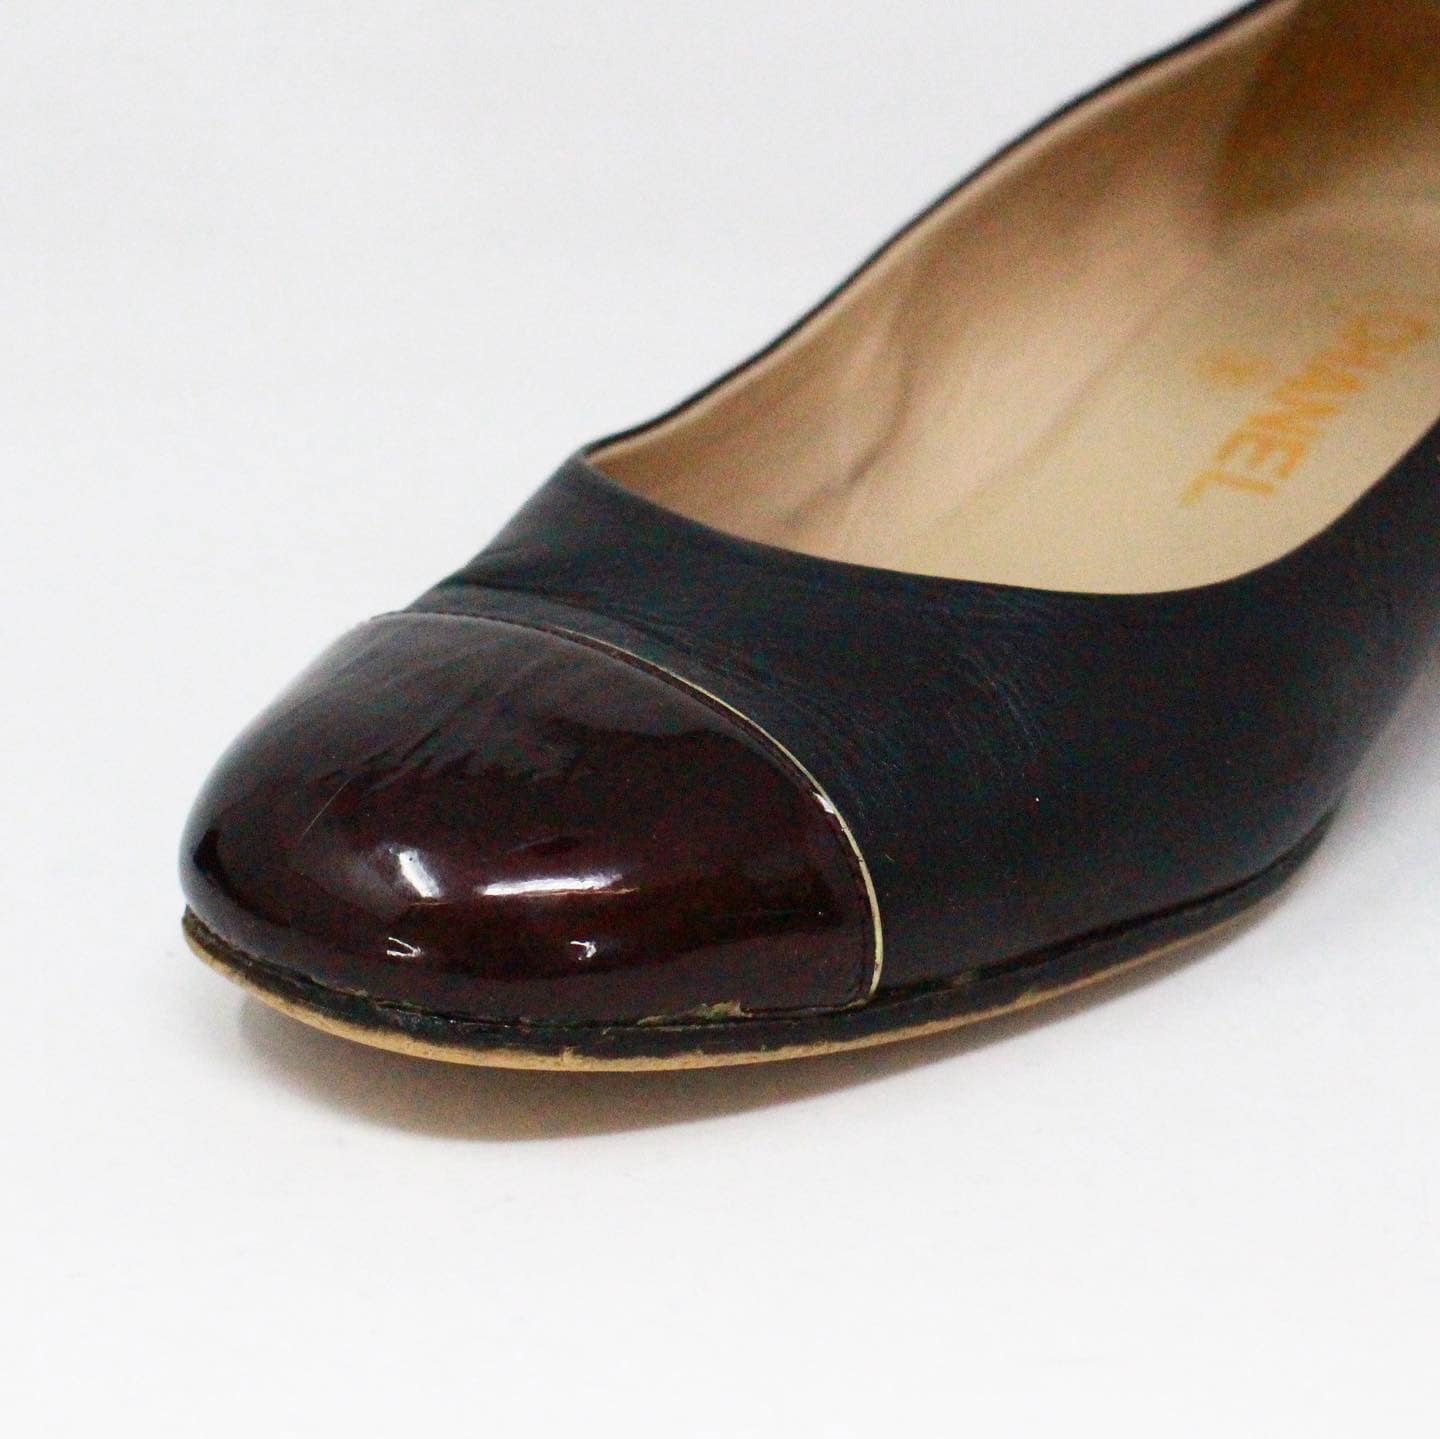 CHANEL #38037 Bicolor Black and Wine Patent Leather Heel Flats (US